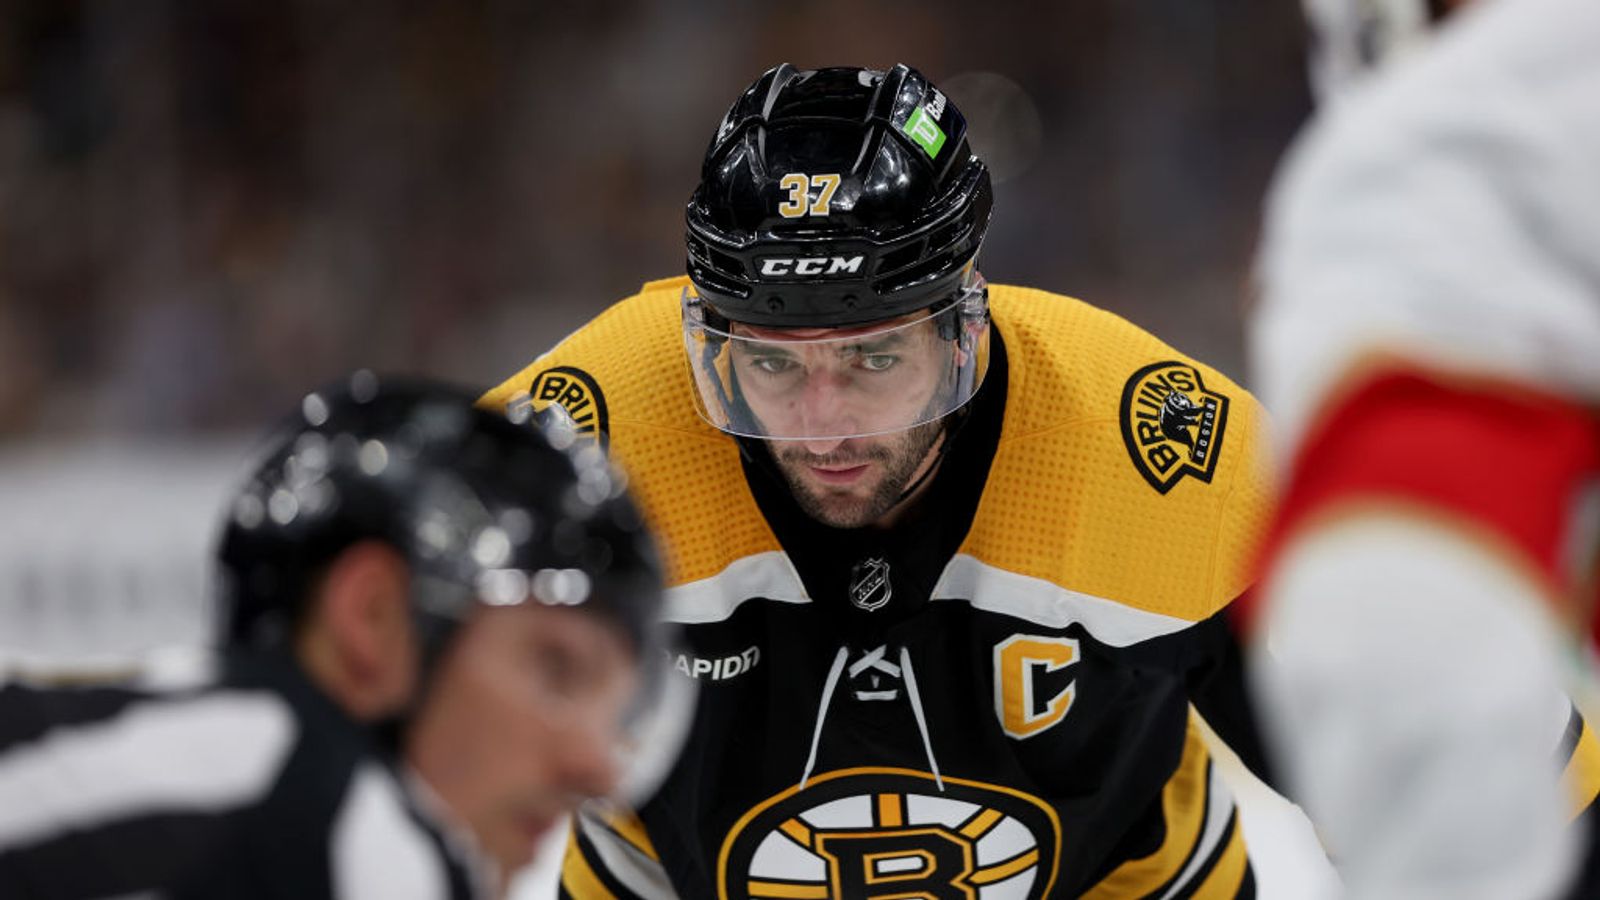 NHL Notebook Bruins embracing adversity, opportunity ahead of Game 7